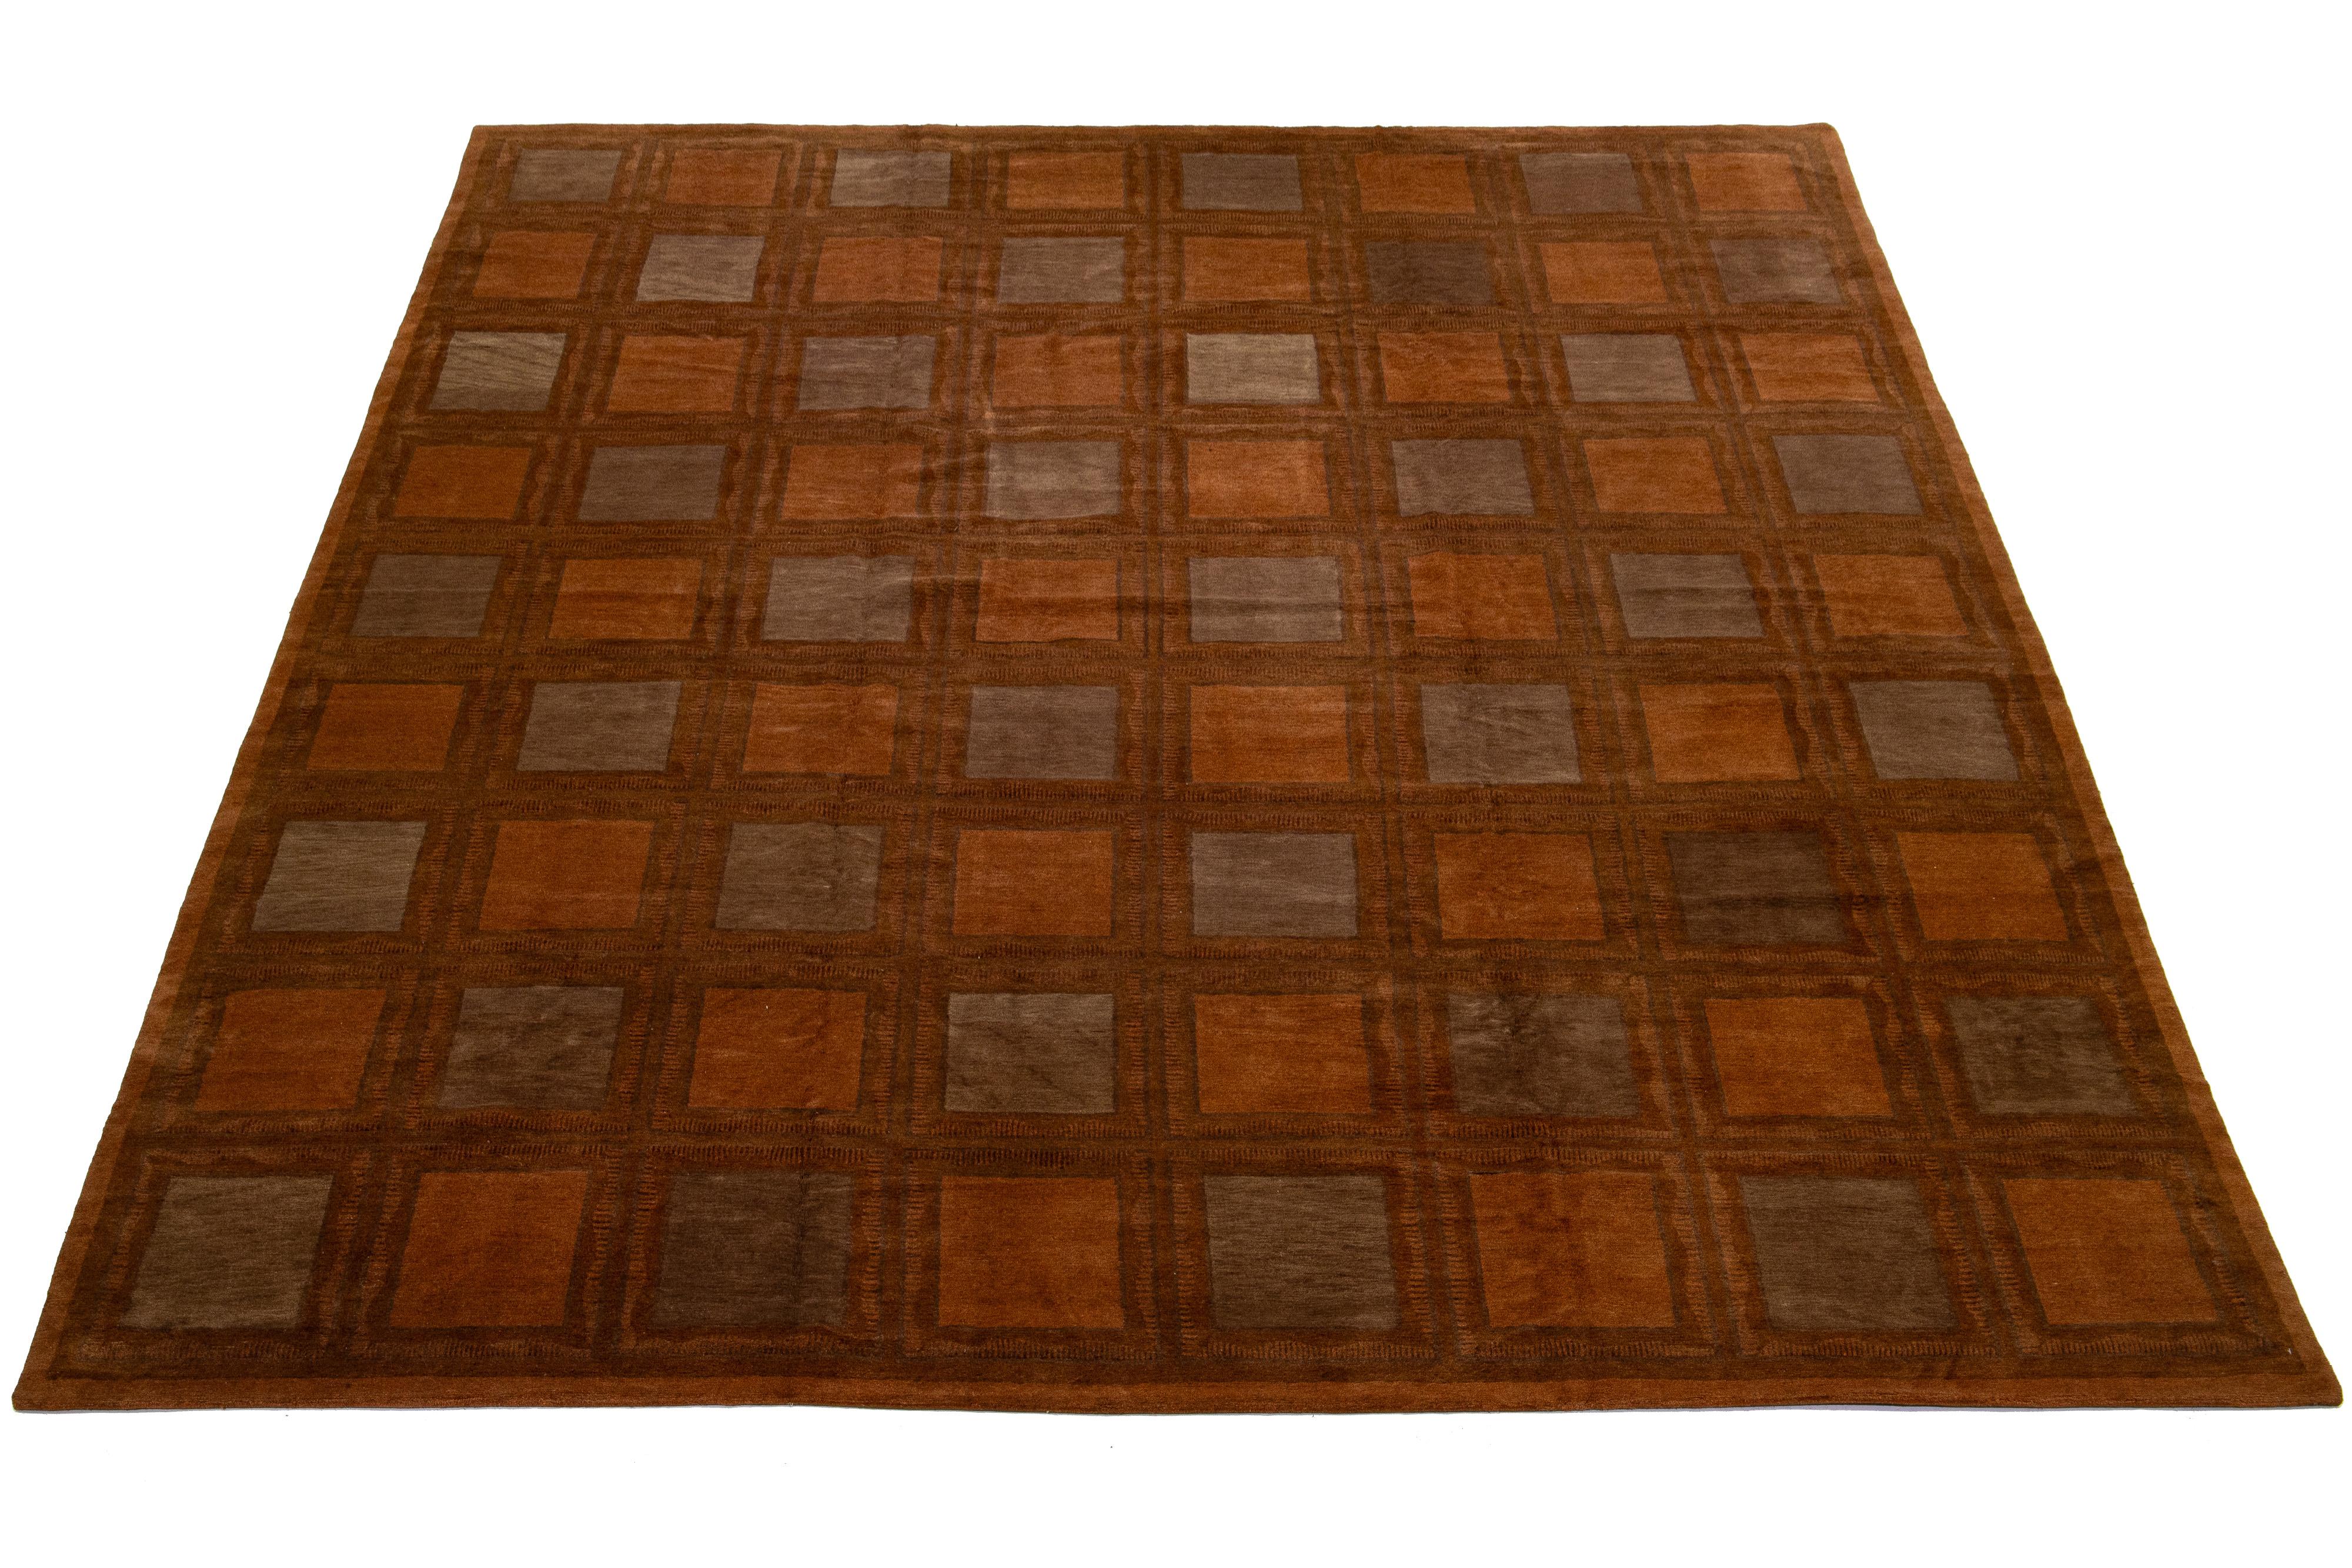 This contemporary Tibetan rug showcases a bold orange hue complemented by subtle brown details, resulting in a sleek and elegant geometric design that captures the spirit of modernism in the 21st century.

This rug measures 13'2